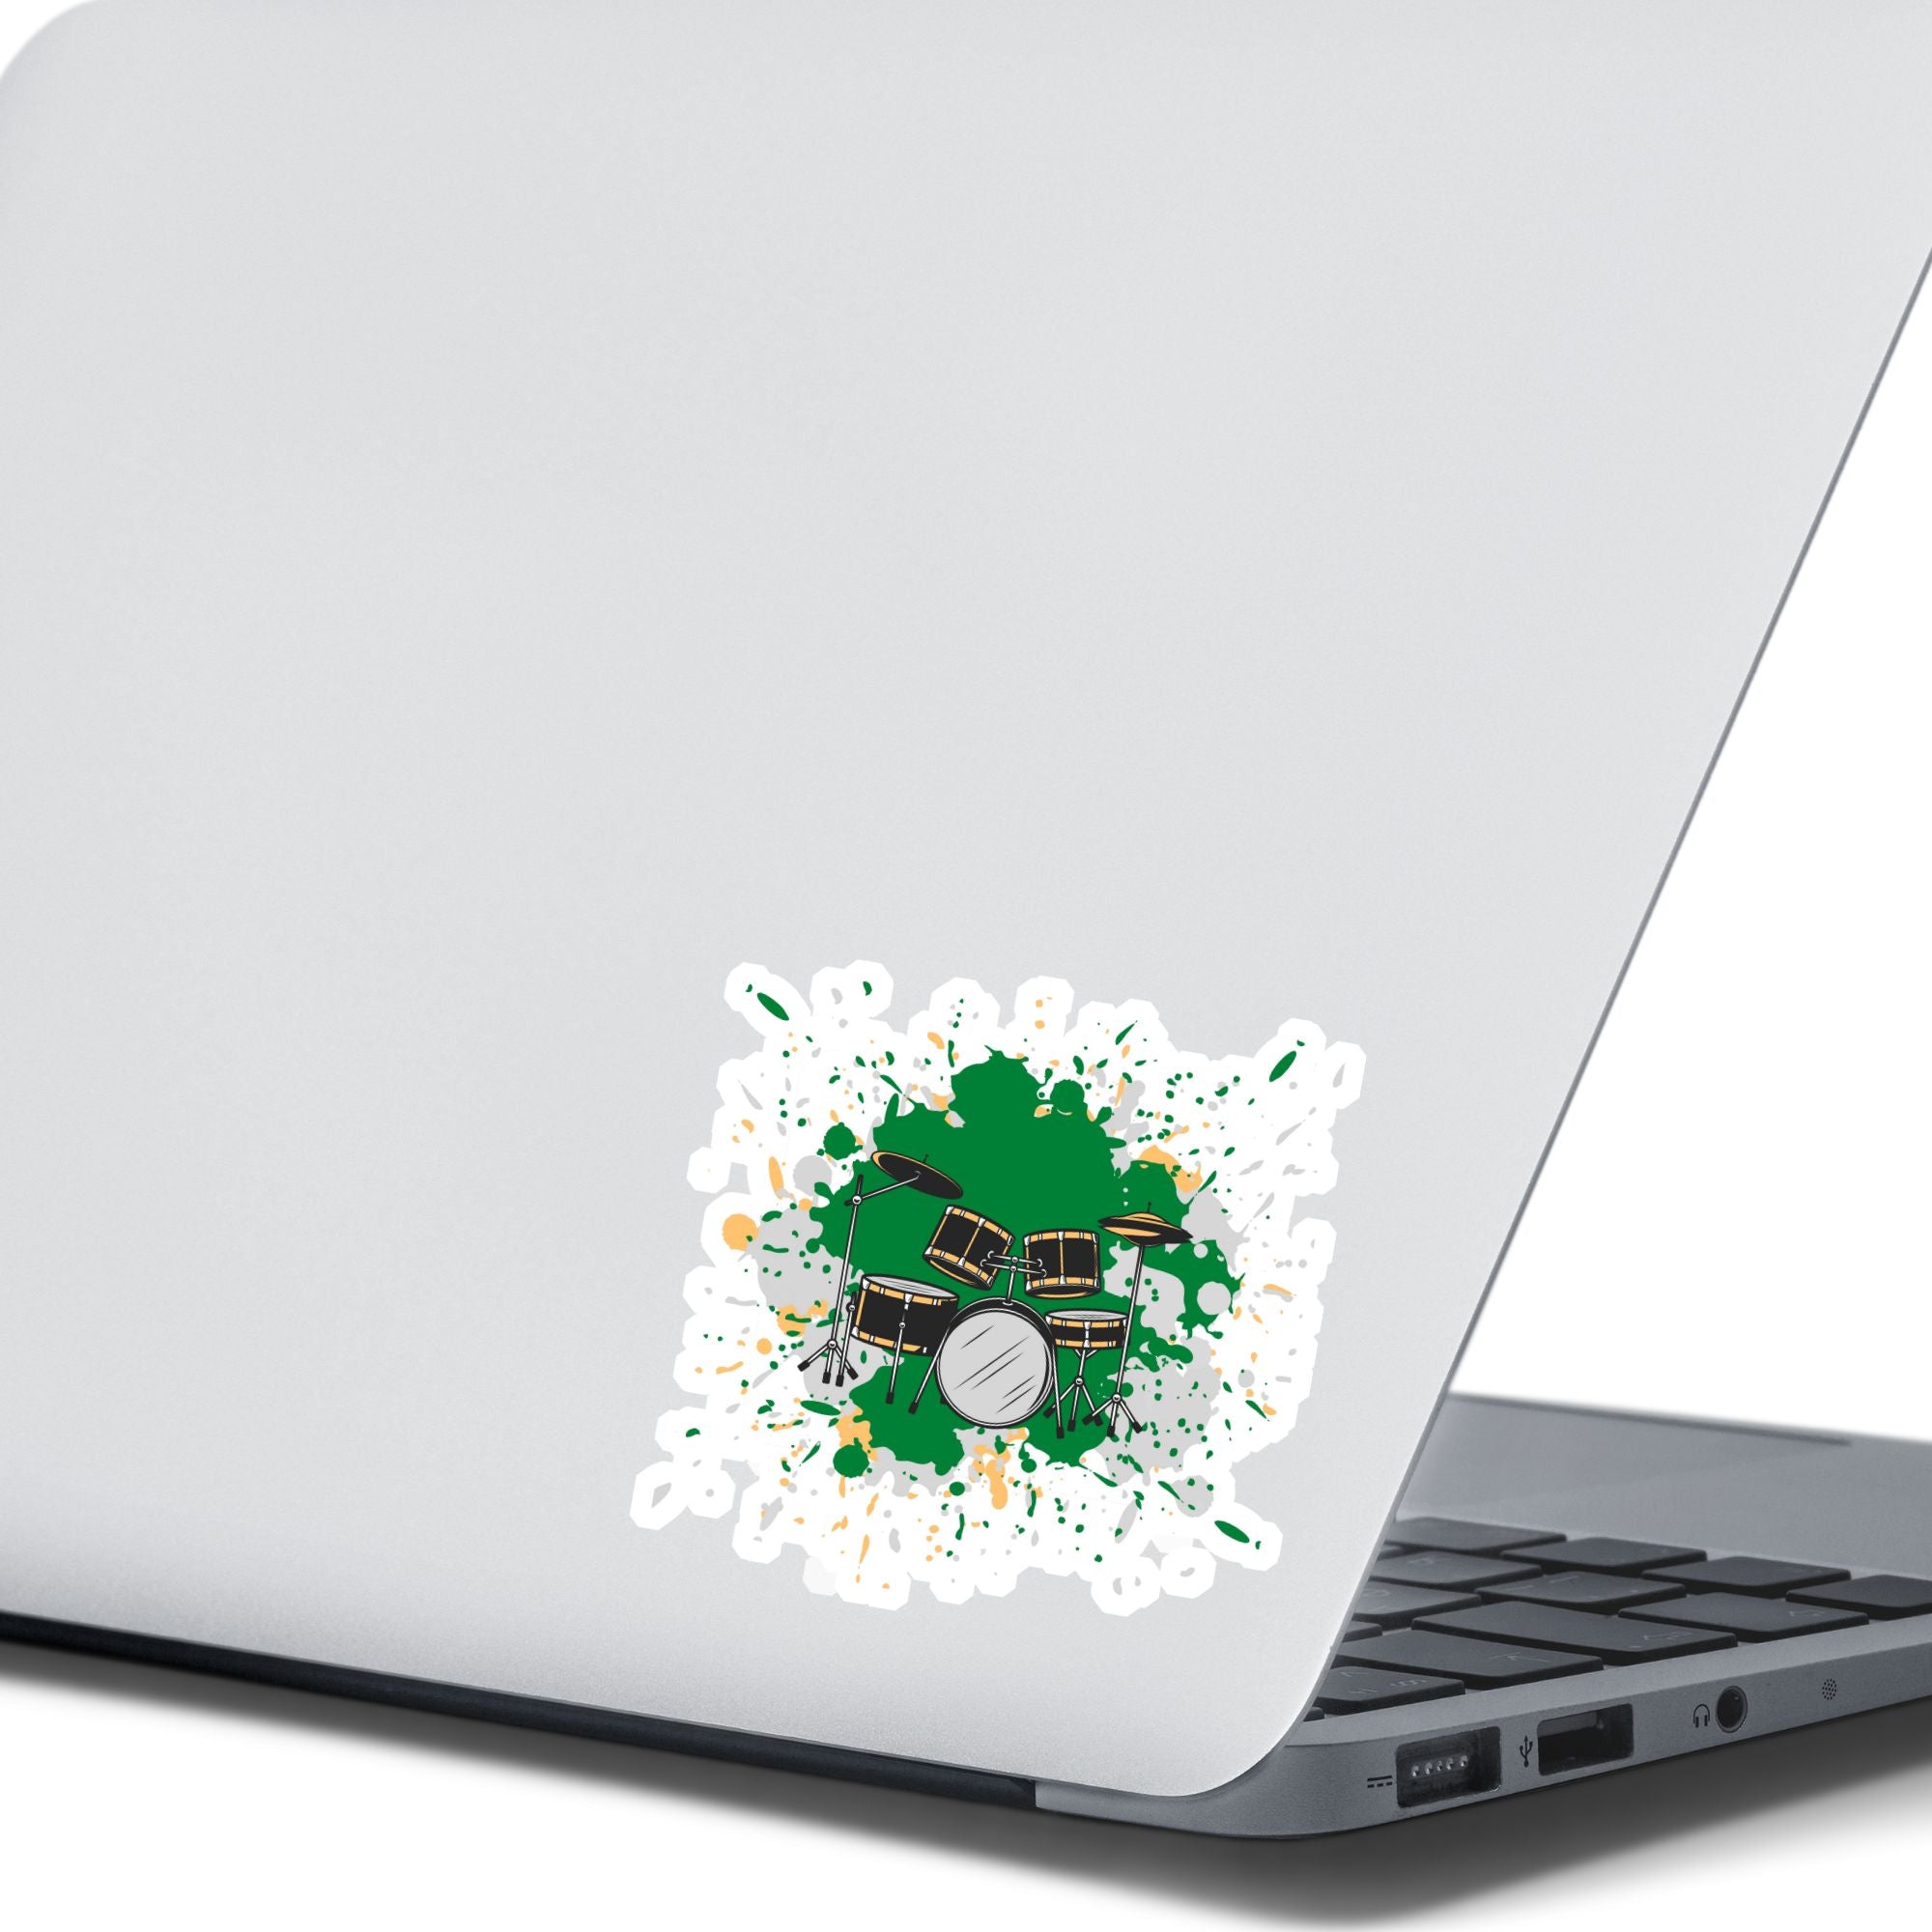 Drummer's, this individual die-cut sticker is for you! It features a drum kit on a green and gray paint splashed background. This drum sticker makes a great gift for anyone who loves to hit the skins. This image shows the drums die-cut sticker on the back of an open laptop.